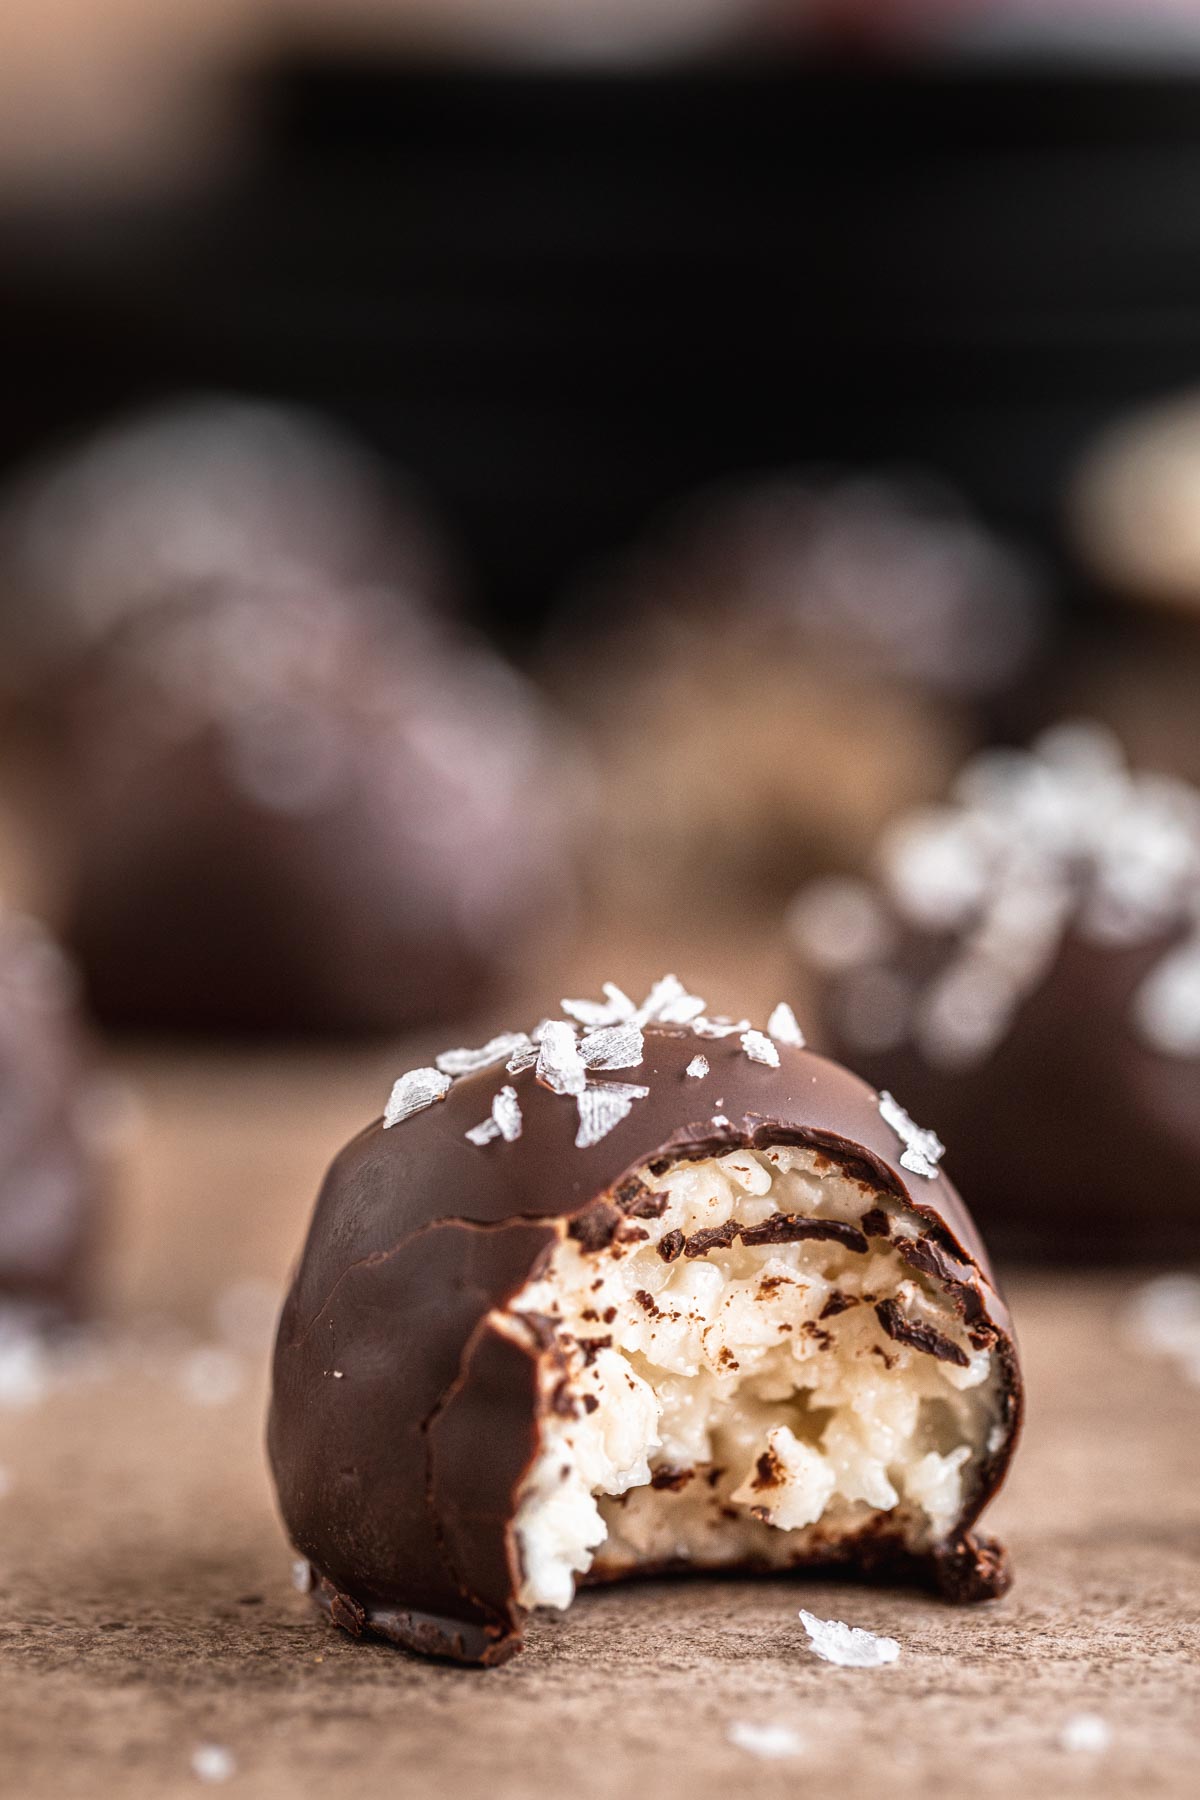 Easy no bake Chocolate Coconut Balls topped with flaky sea salt and has a bite taken out. 